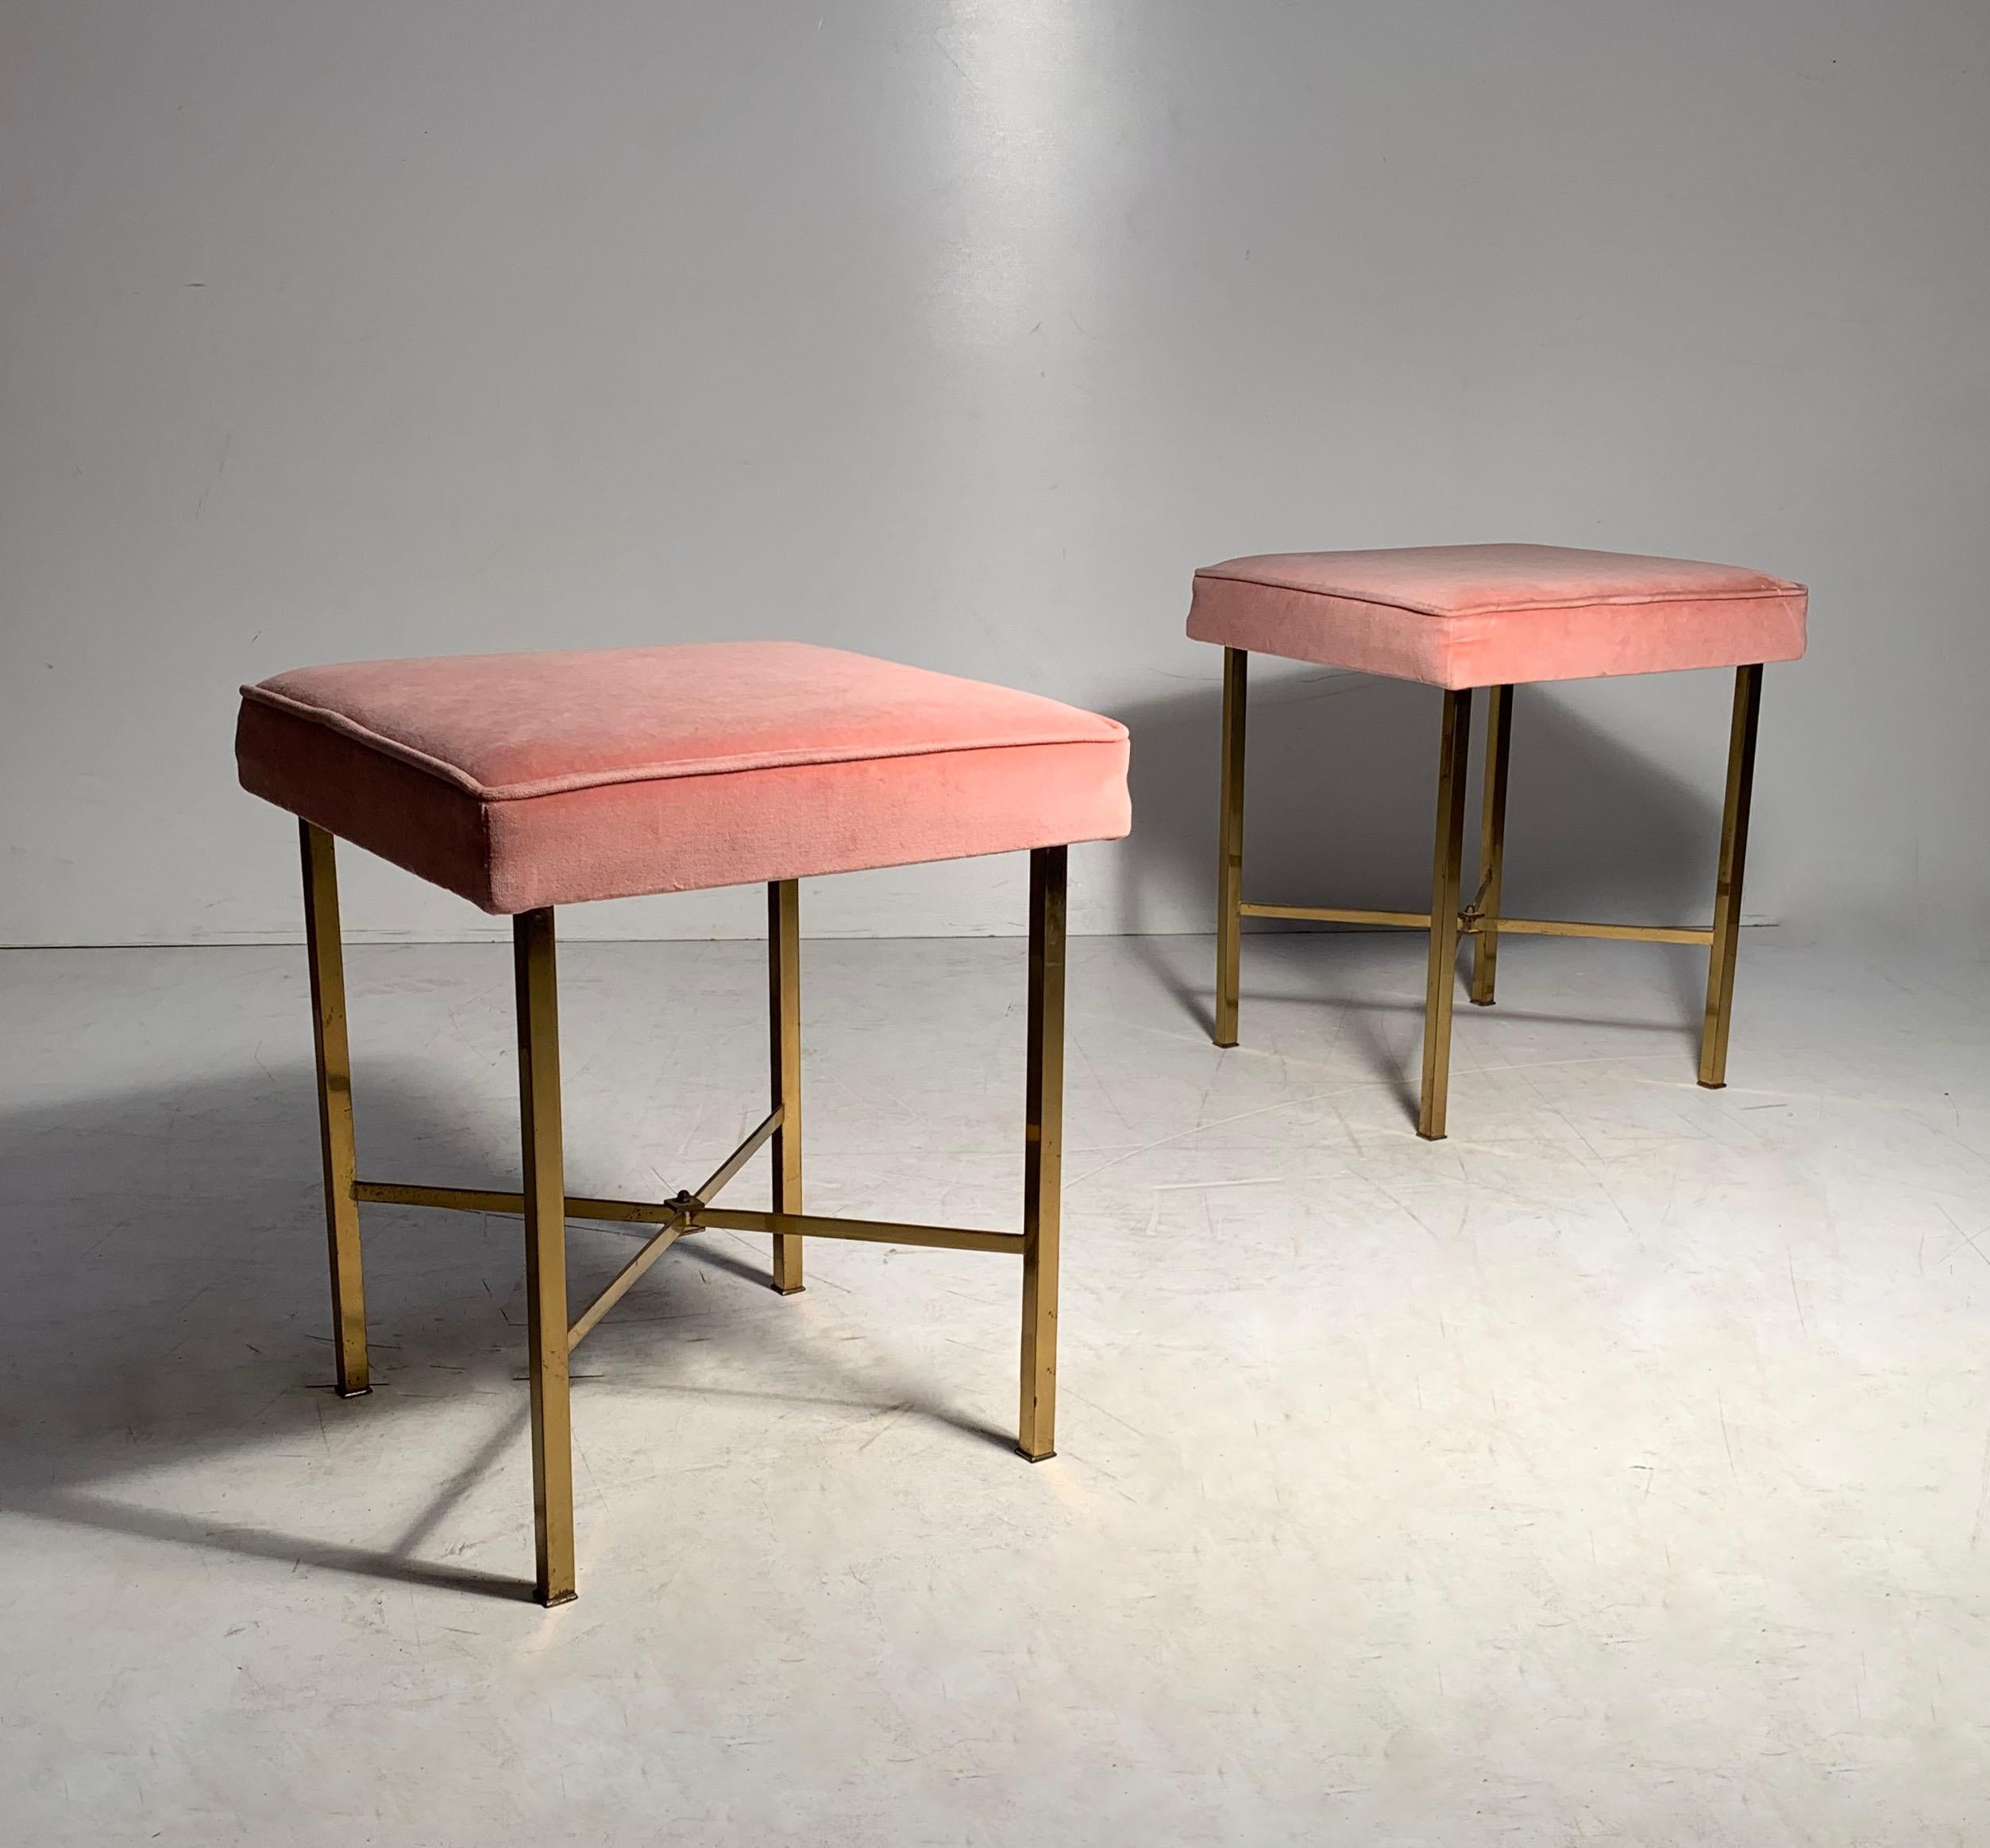 Pair of Mid-Century Modern Stools in the Manner of Paul McCobb 1